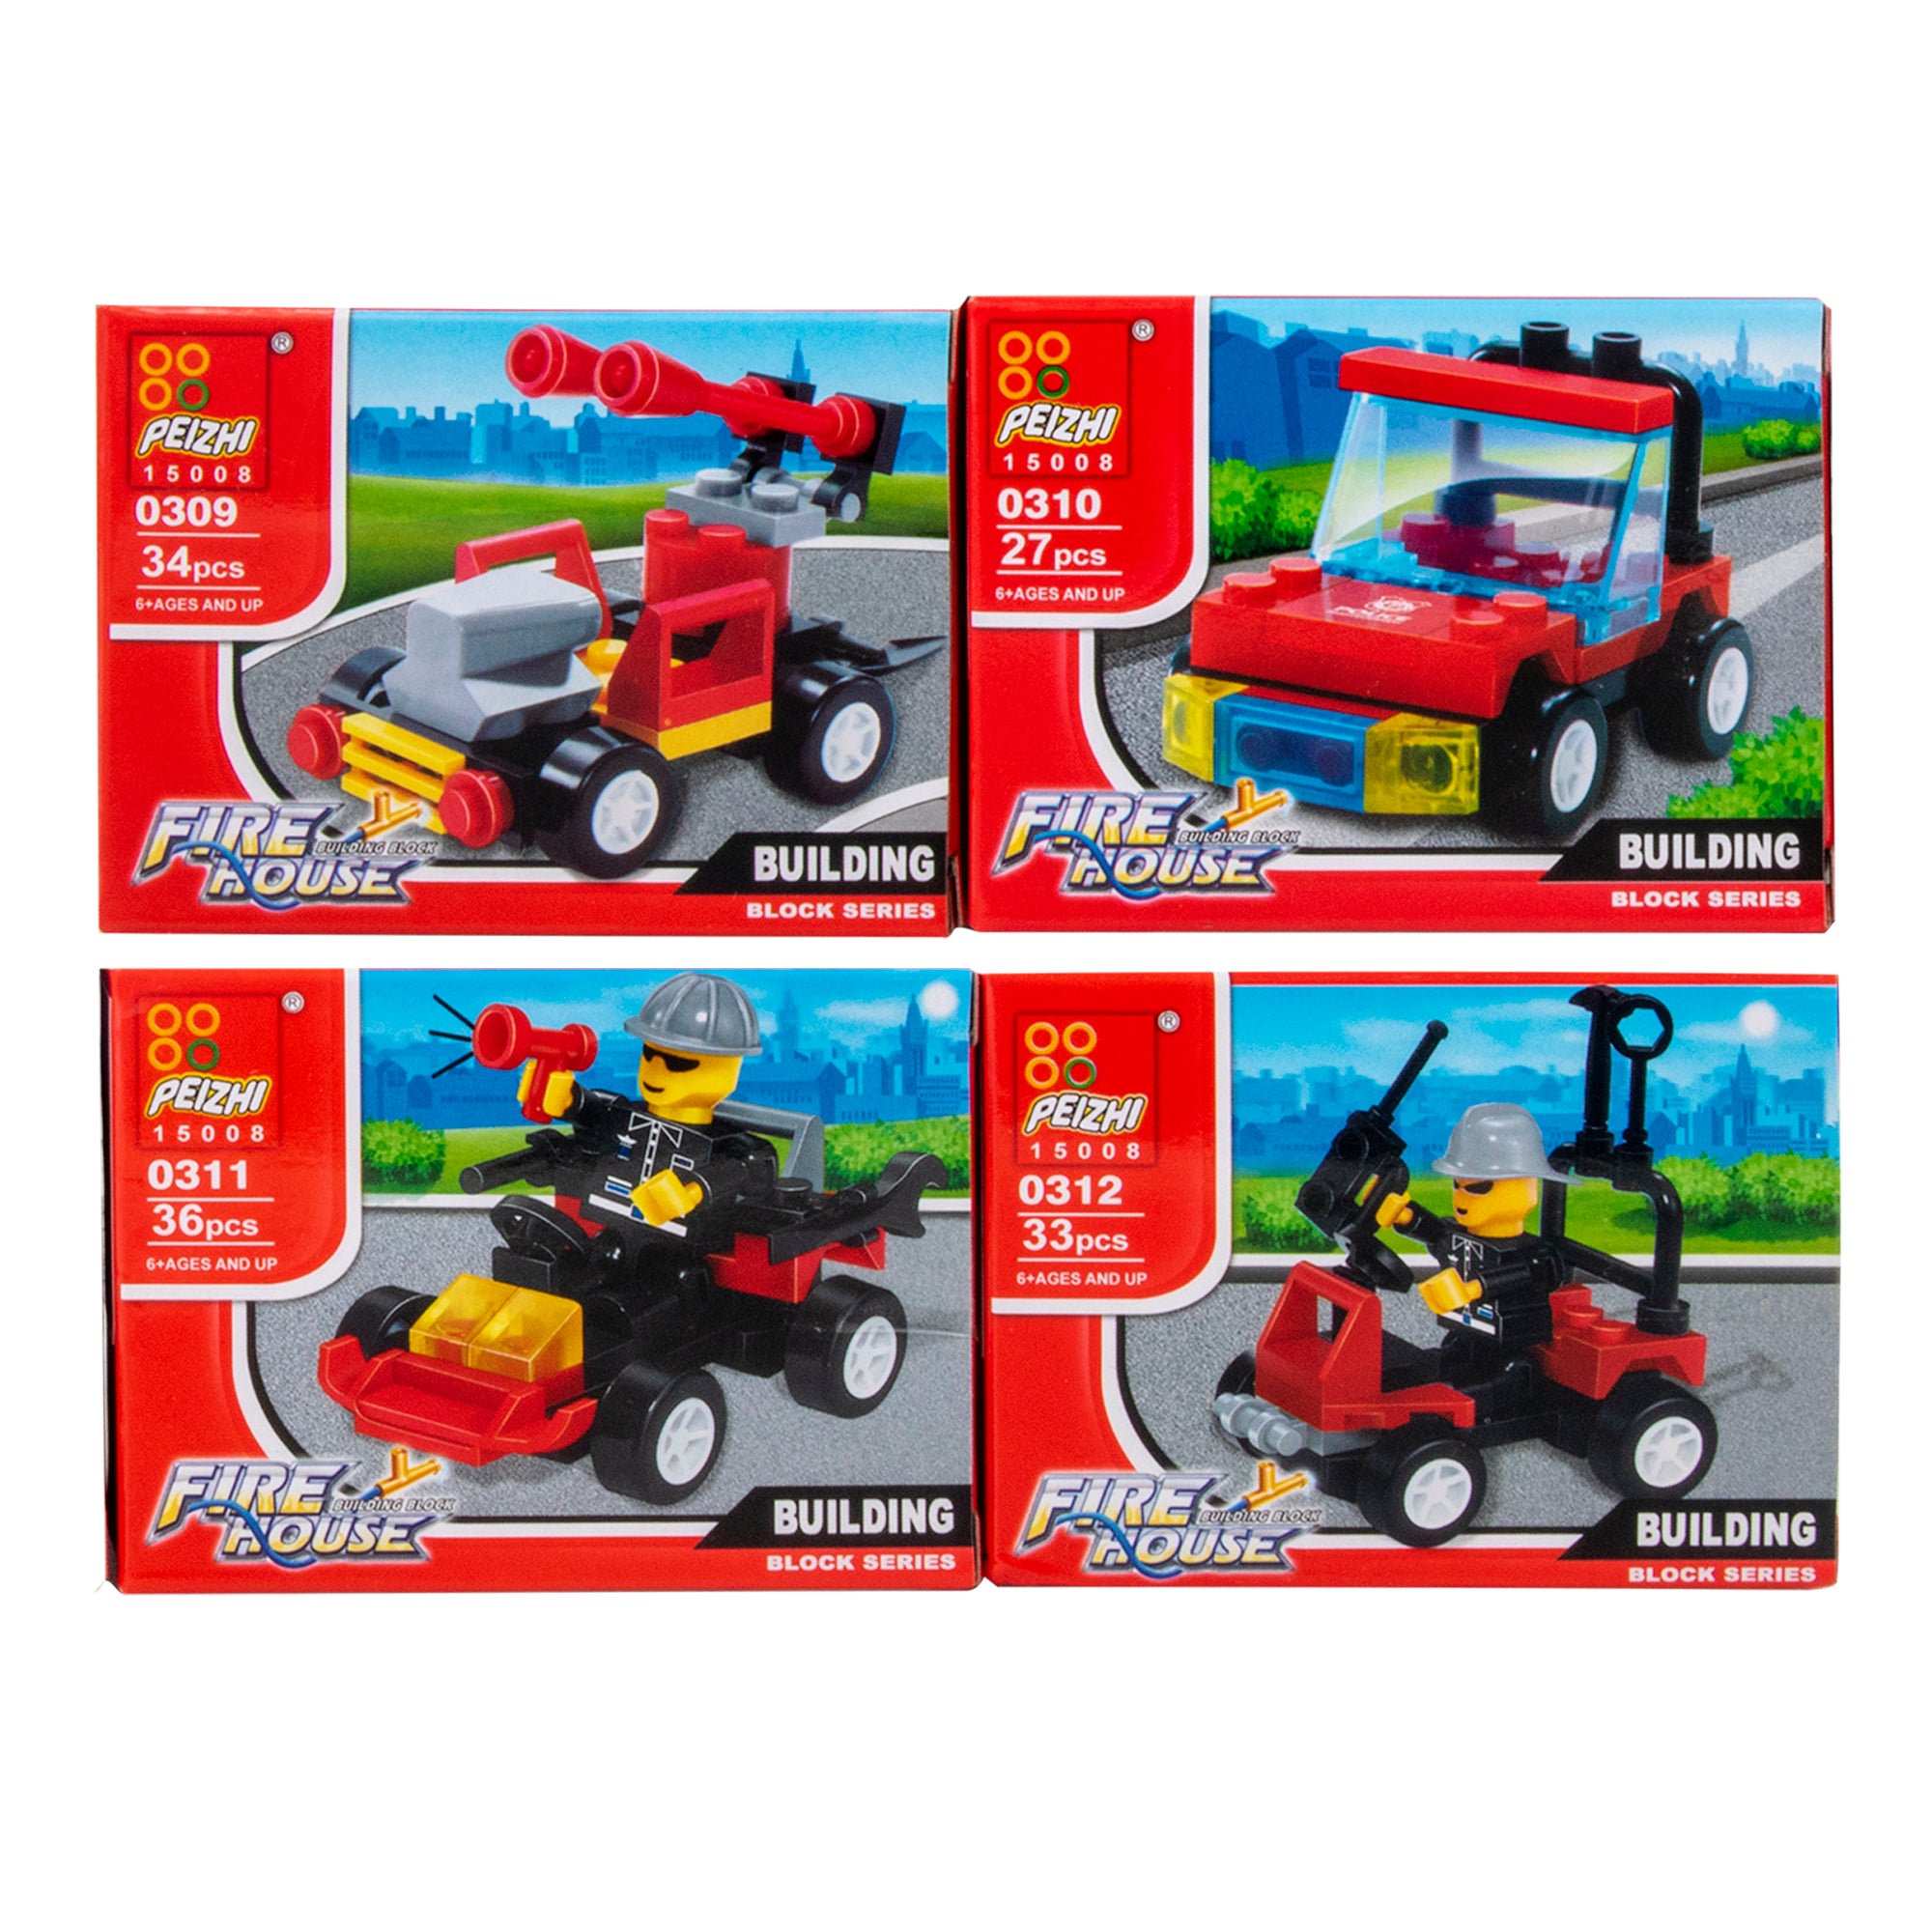 Micro Blocks Fire House Vehicles Toy